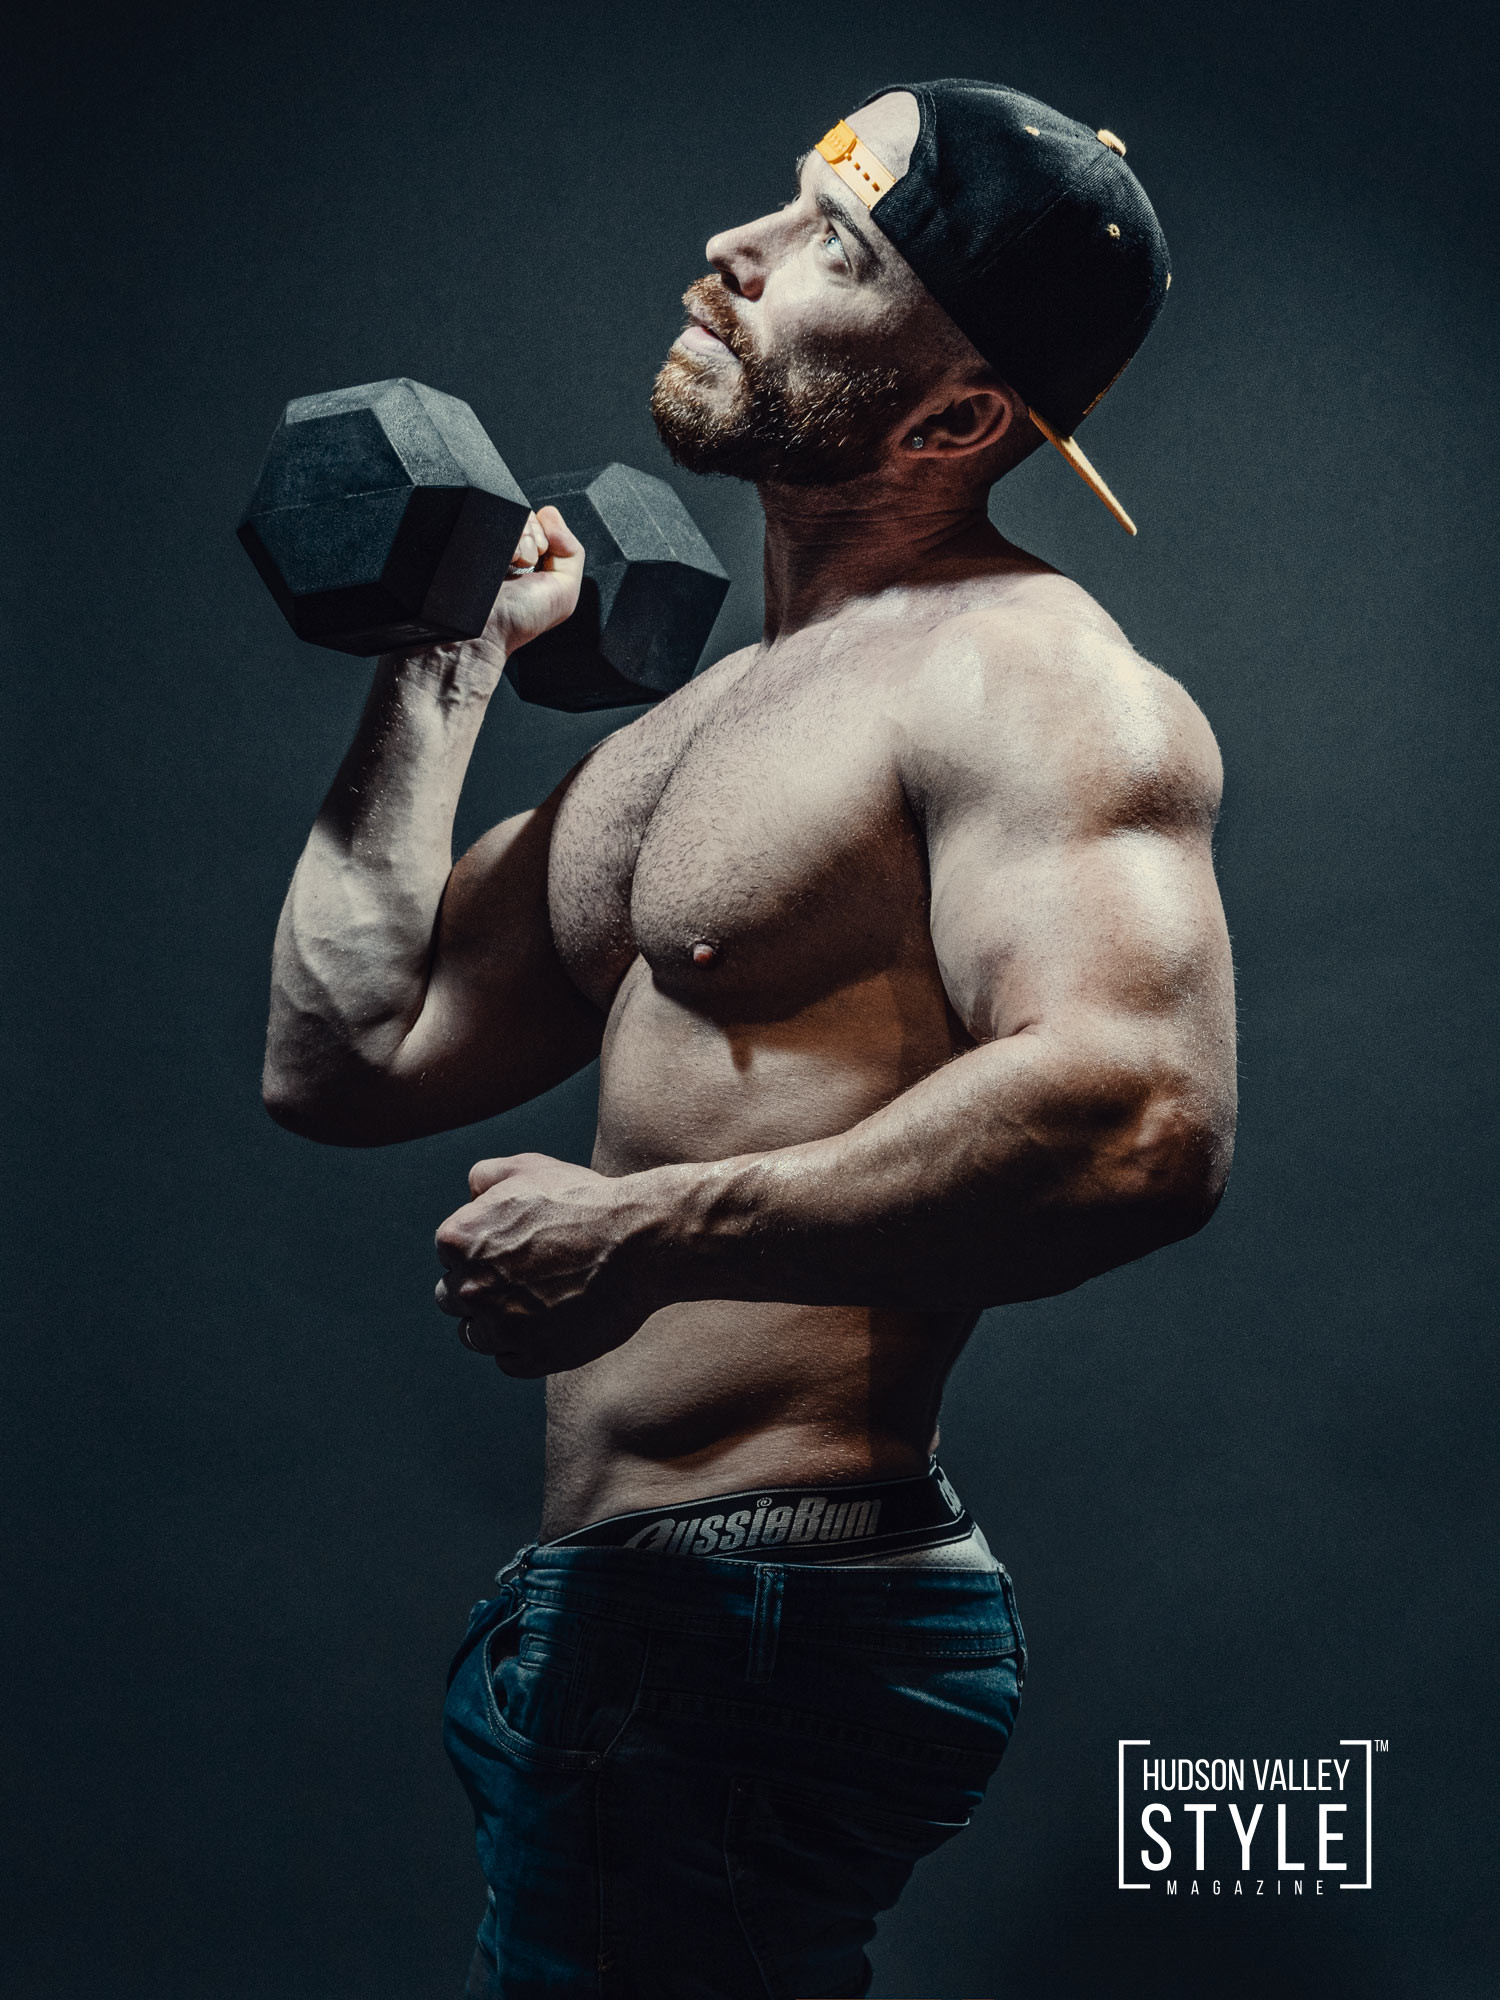 The Habits of Successful Bodybuilders – Nutrition Tips by Coach Maxwell Alexander, Author of "The Secrets of Natural Bodybuilding" on Amazon Kindle – Bodybuilding Photography – Duncan Avenue Studios